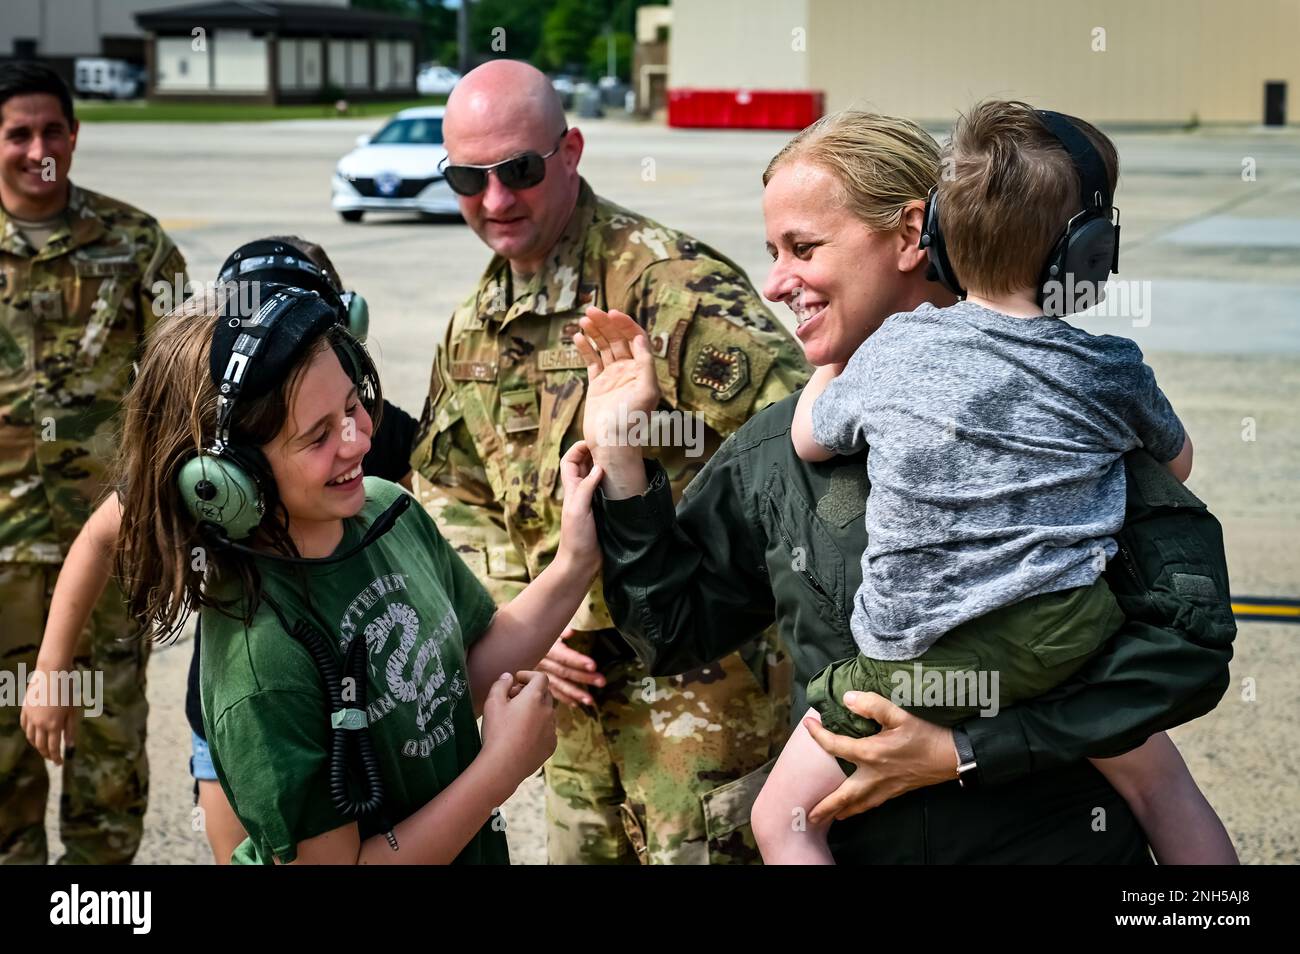 U.S. Air Force Colonel Michele Lo Bianco, 305th Operations Group commander, embraces her son following a fini flight on June 21, 2022 at Joint Base McGuire-Dix-Lakehurst, N.J. Lo Bianco will serve as the 15th Wing commander at Joint Base Pearl Harbor-Hickam. Stock Photo